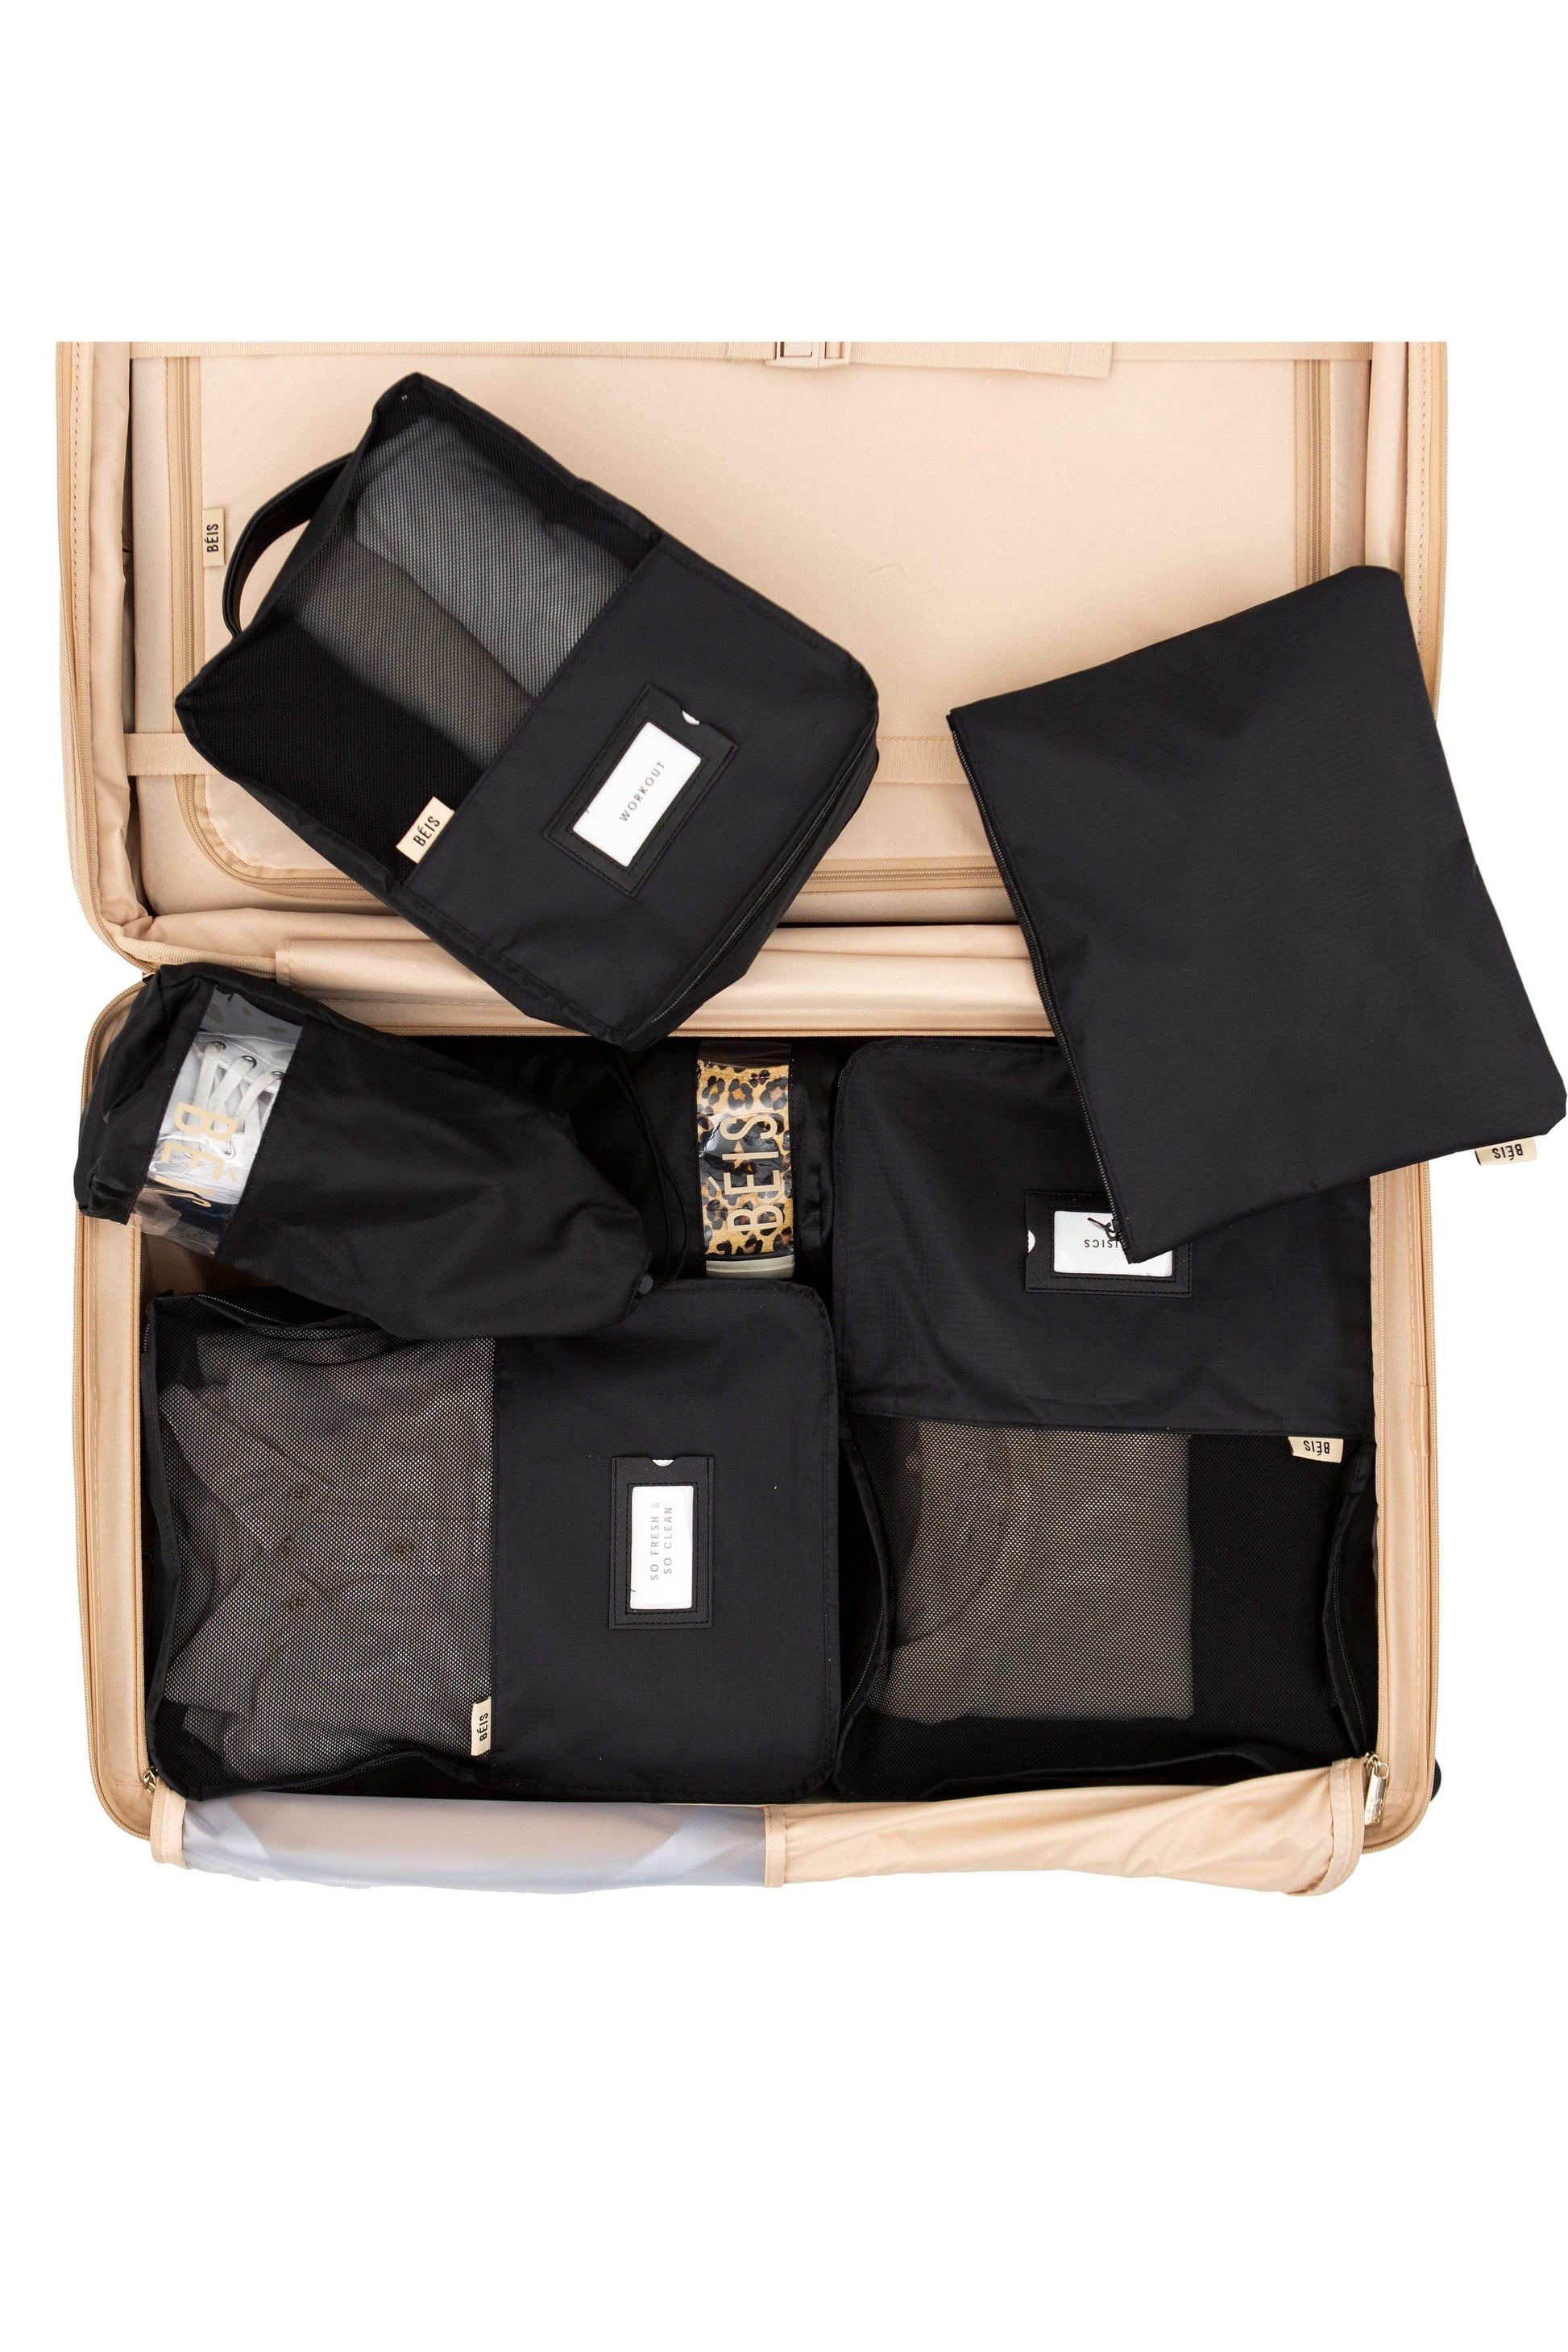 The Packing Cubes in a Suitcase